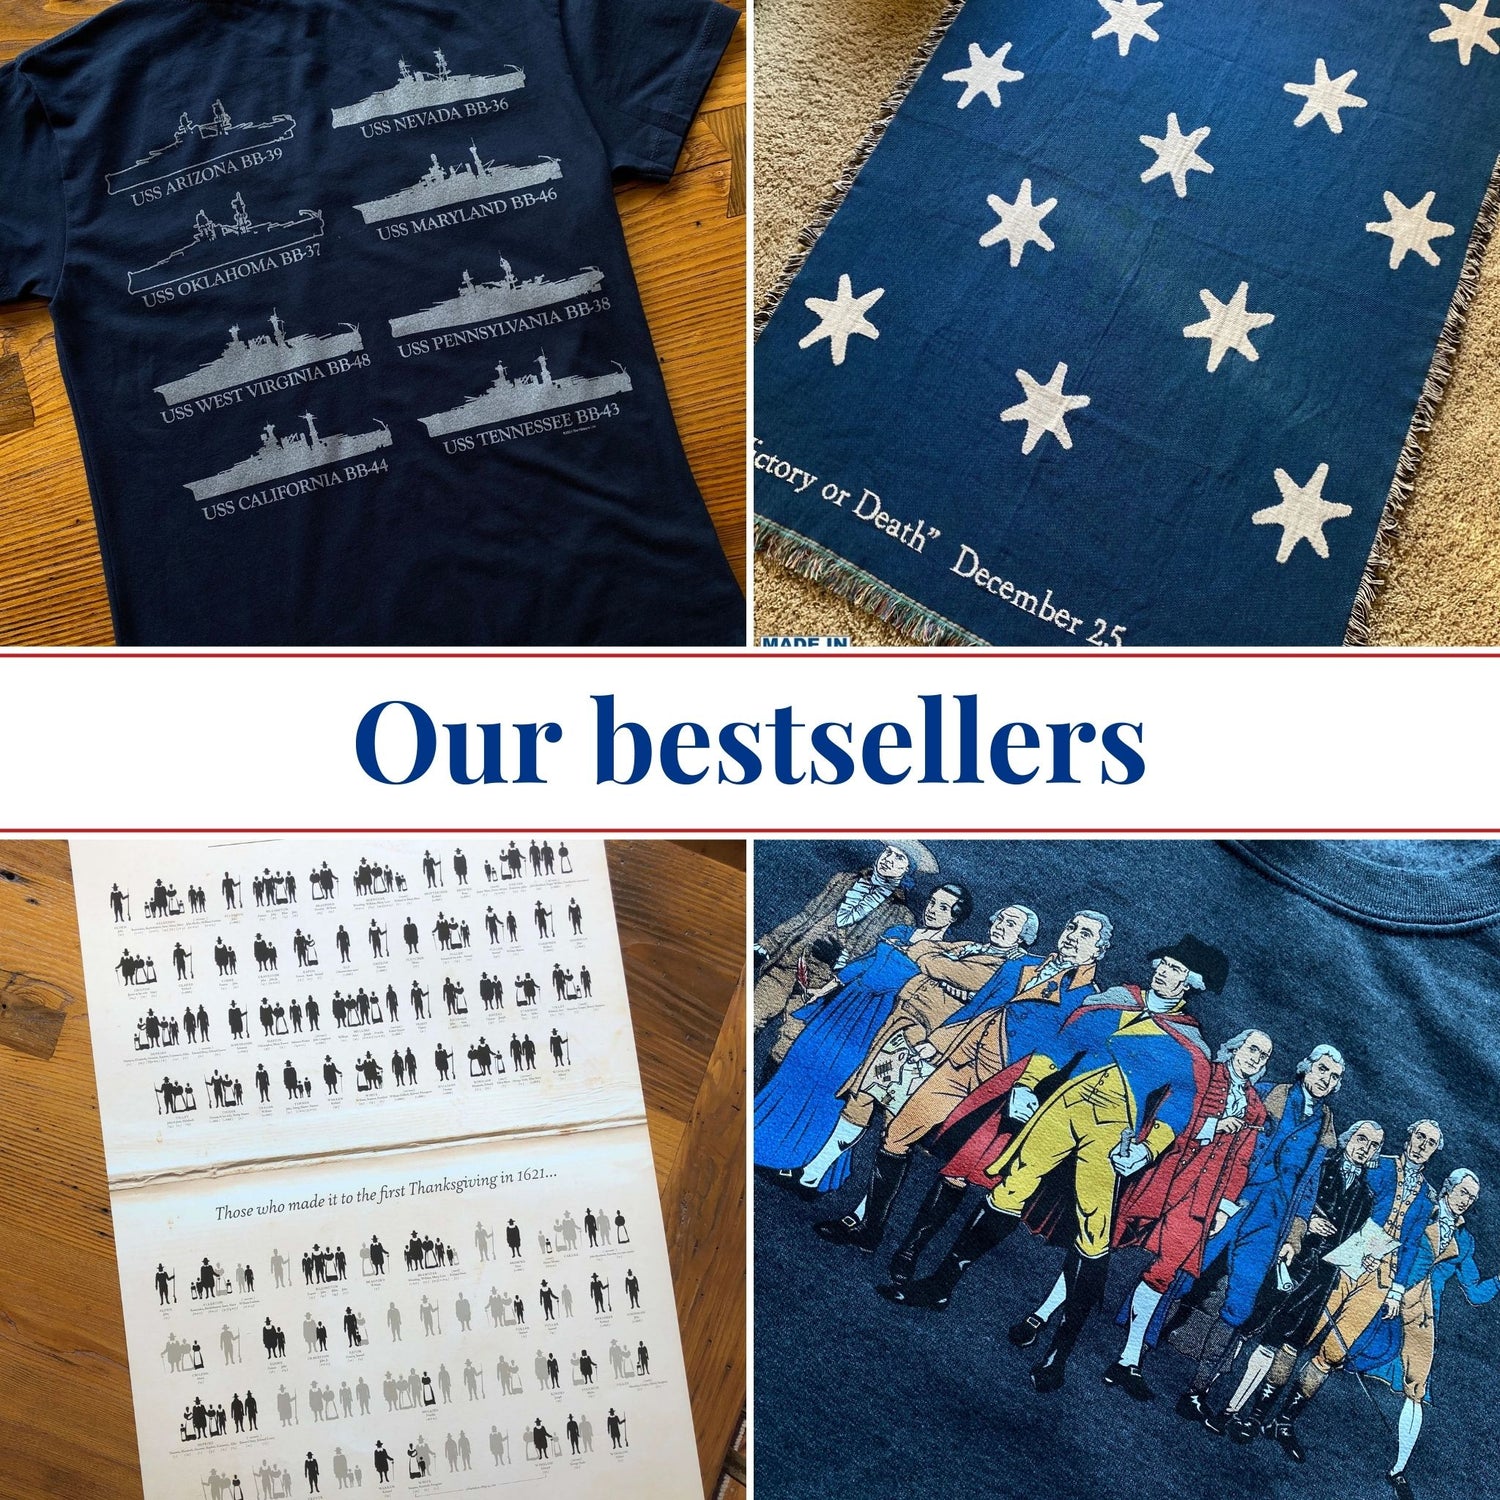 Our bestsellers